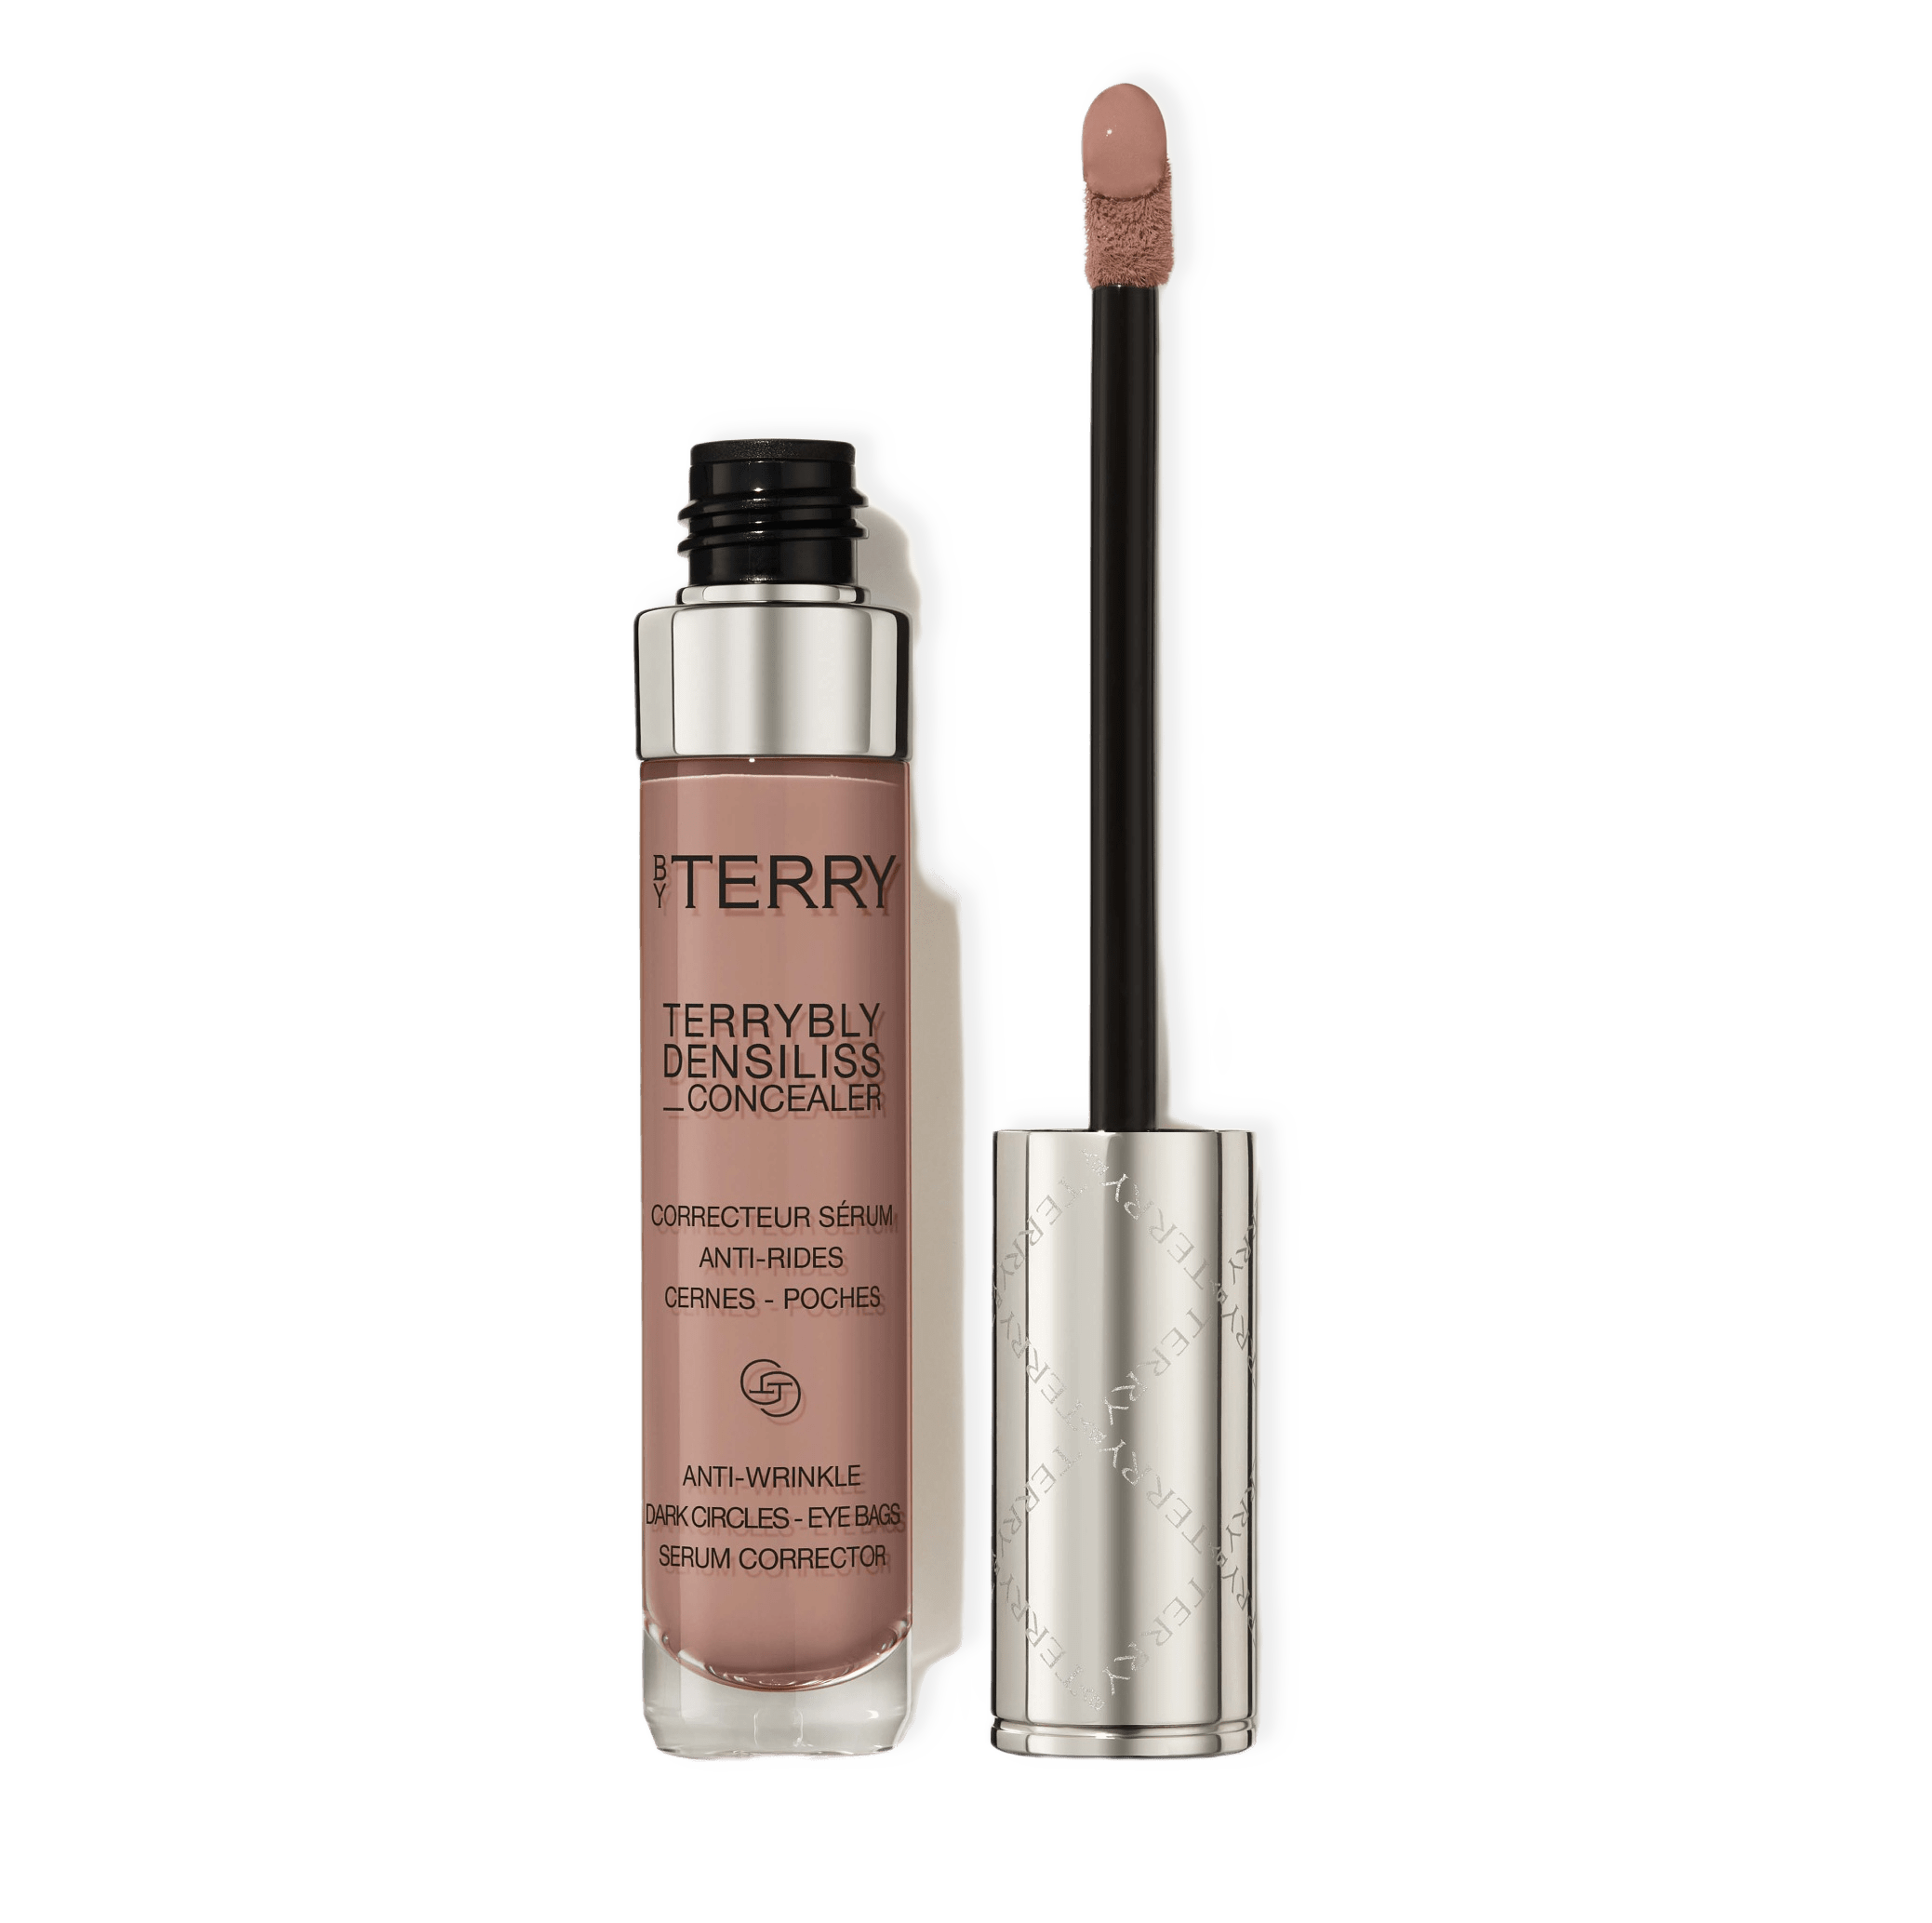 Terrybly Densiliss Concealer Sienna Coper från By Terry